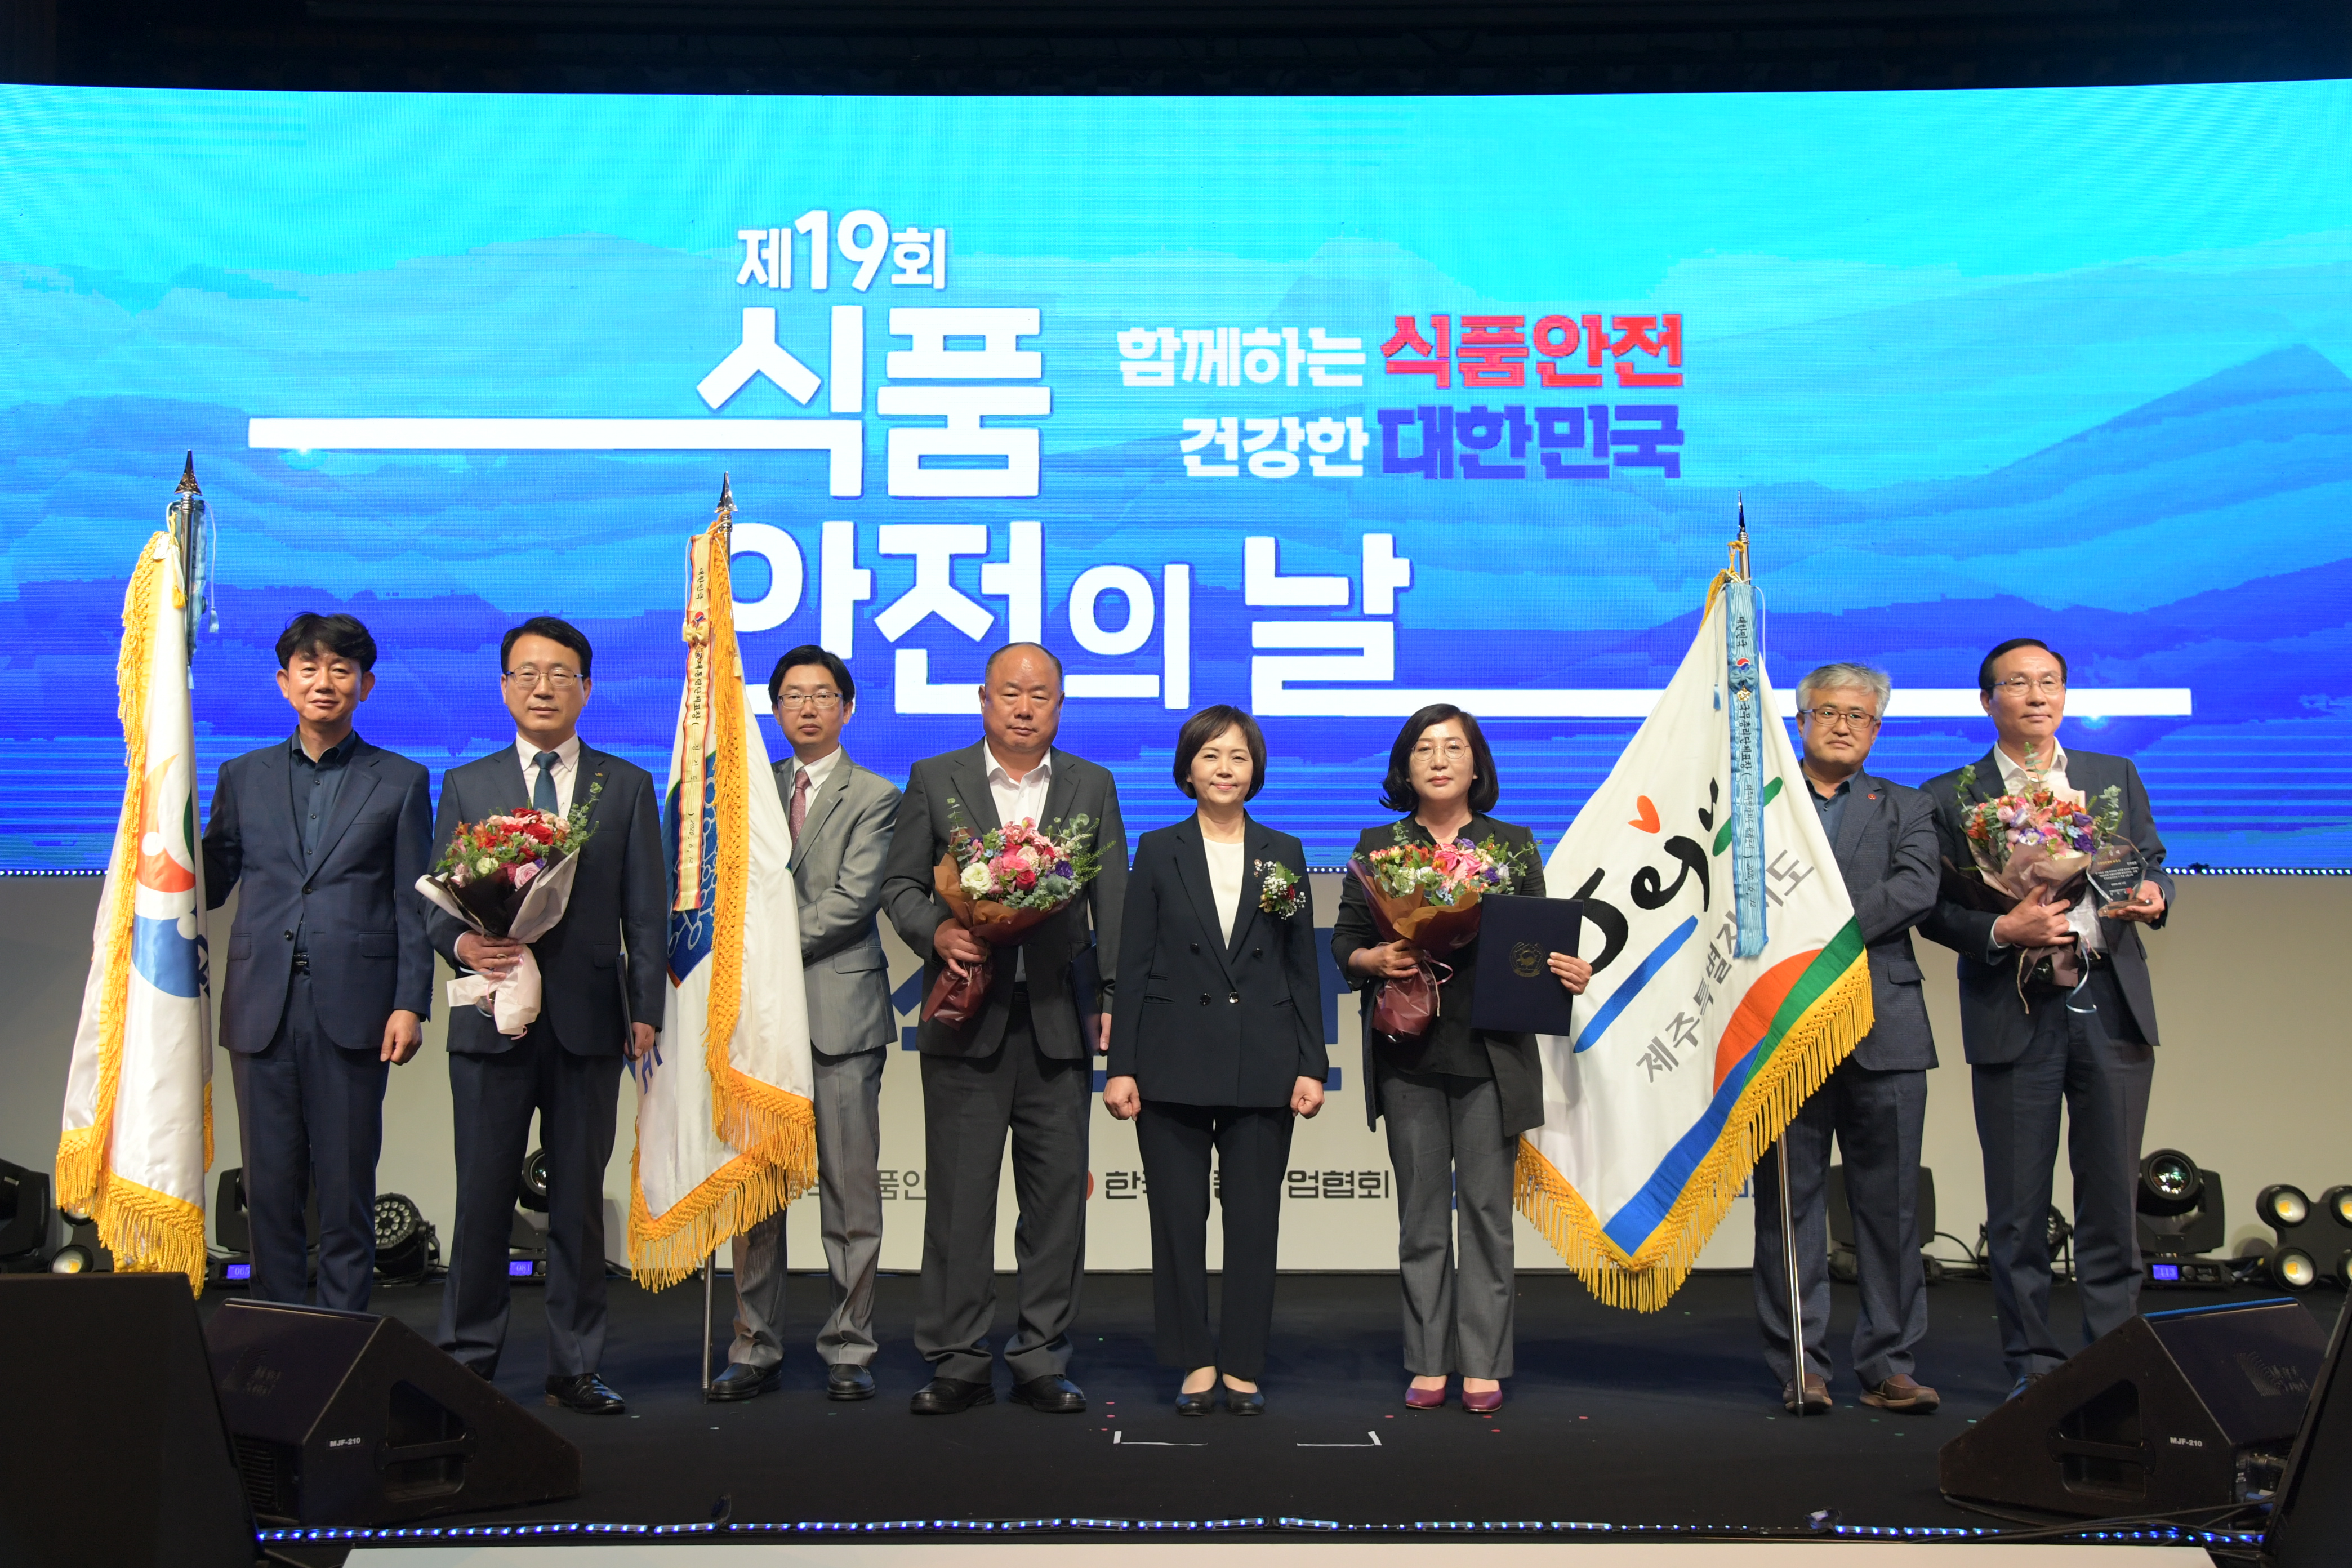 Photo News4 - [Jun. 15, 2020] Commemoration of the 19th Food Safety Day